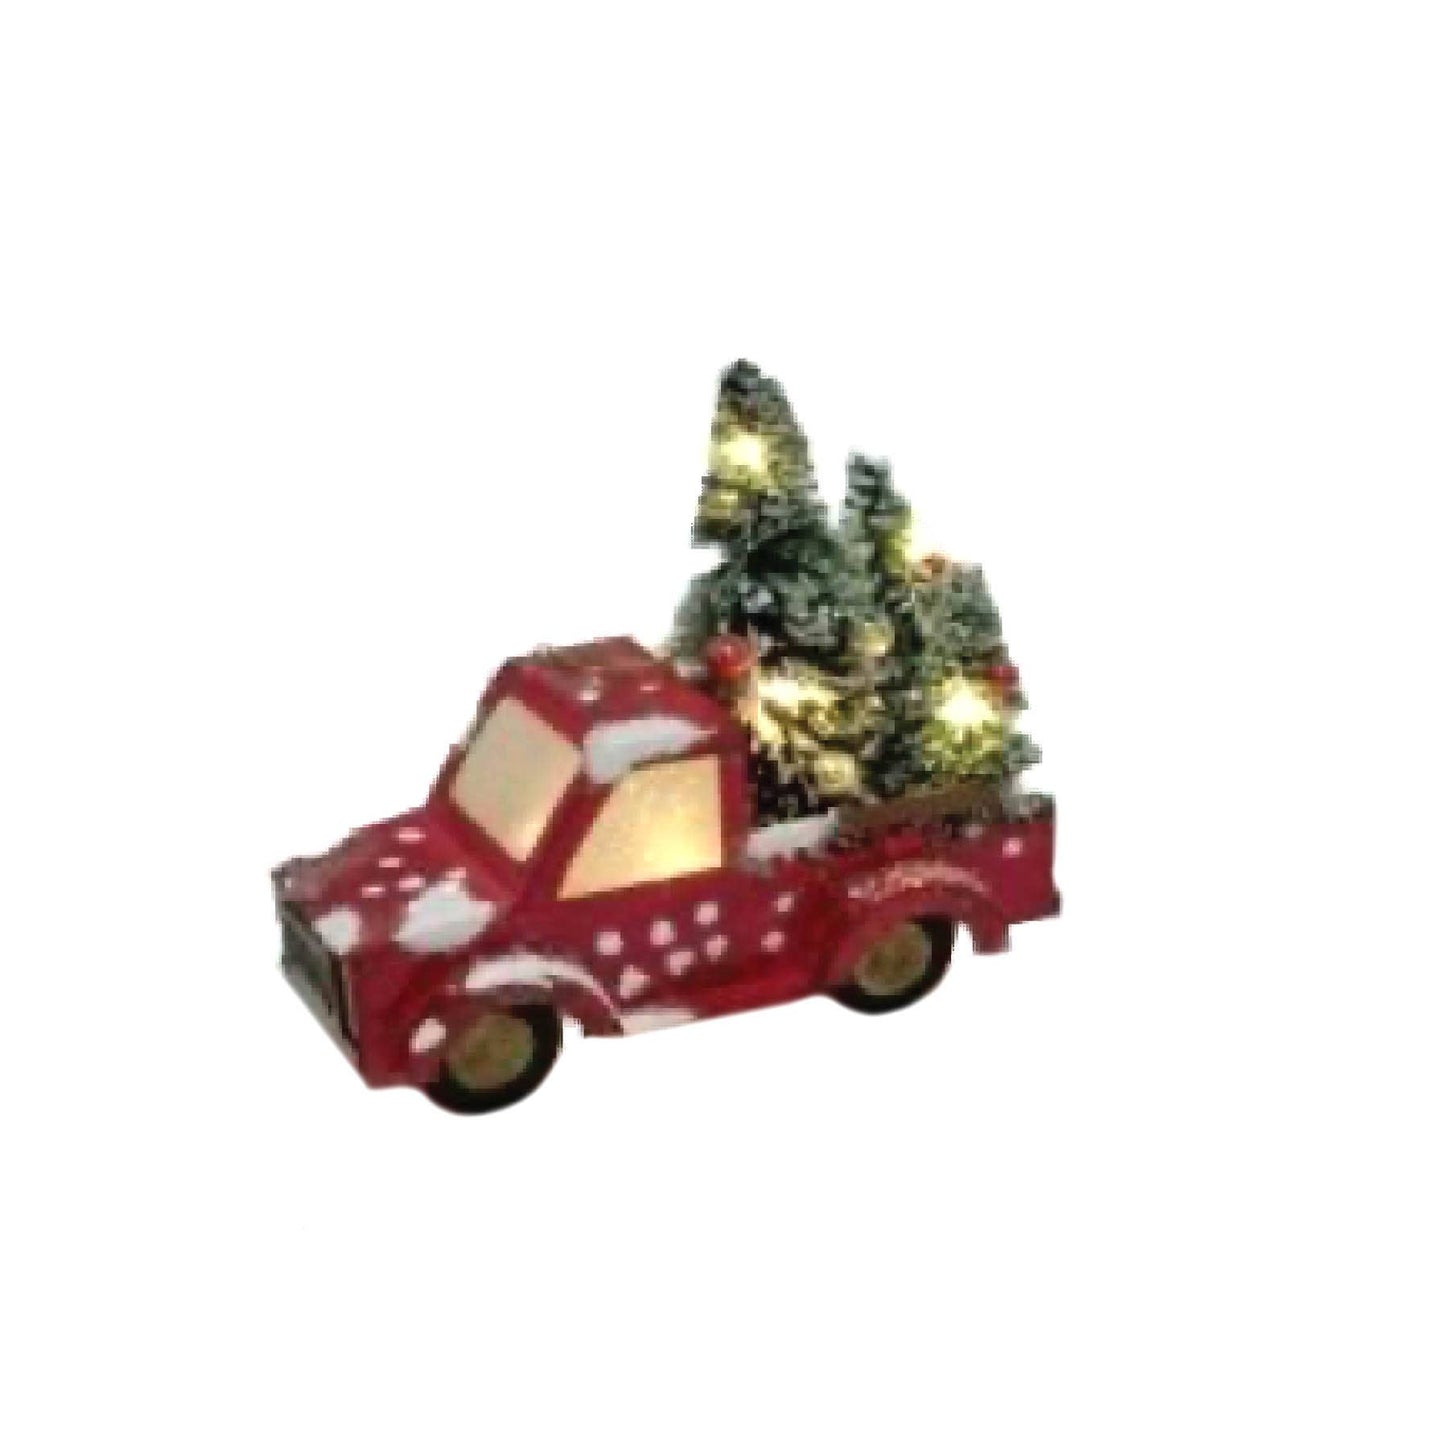 5" Vintage Paper Style Light Up Red truck Ornament W/ 3 trees